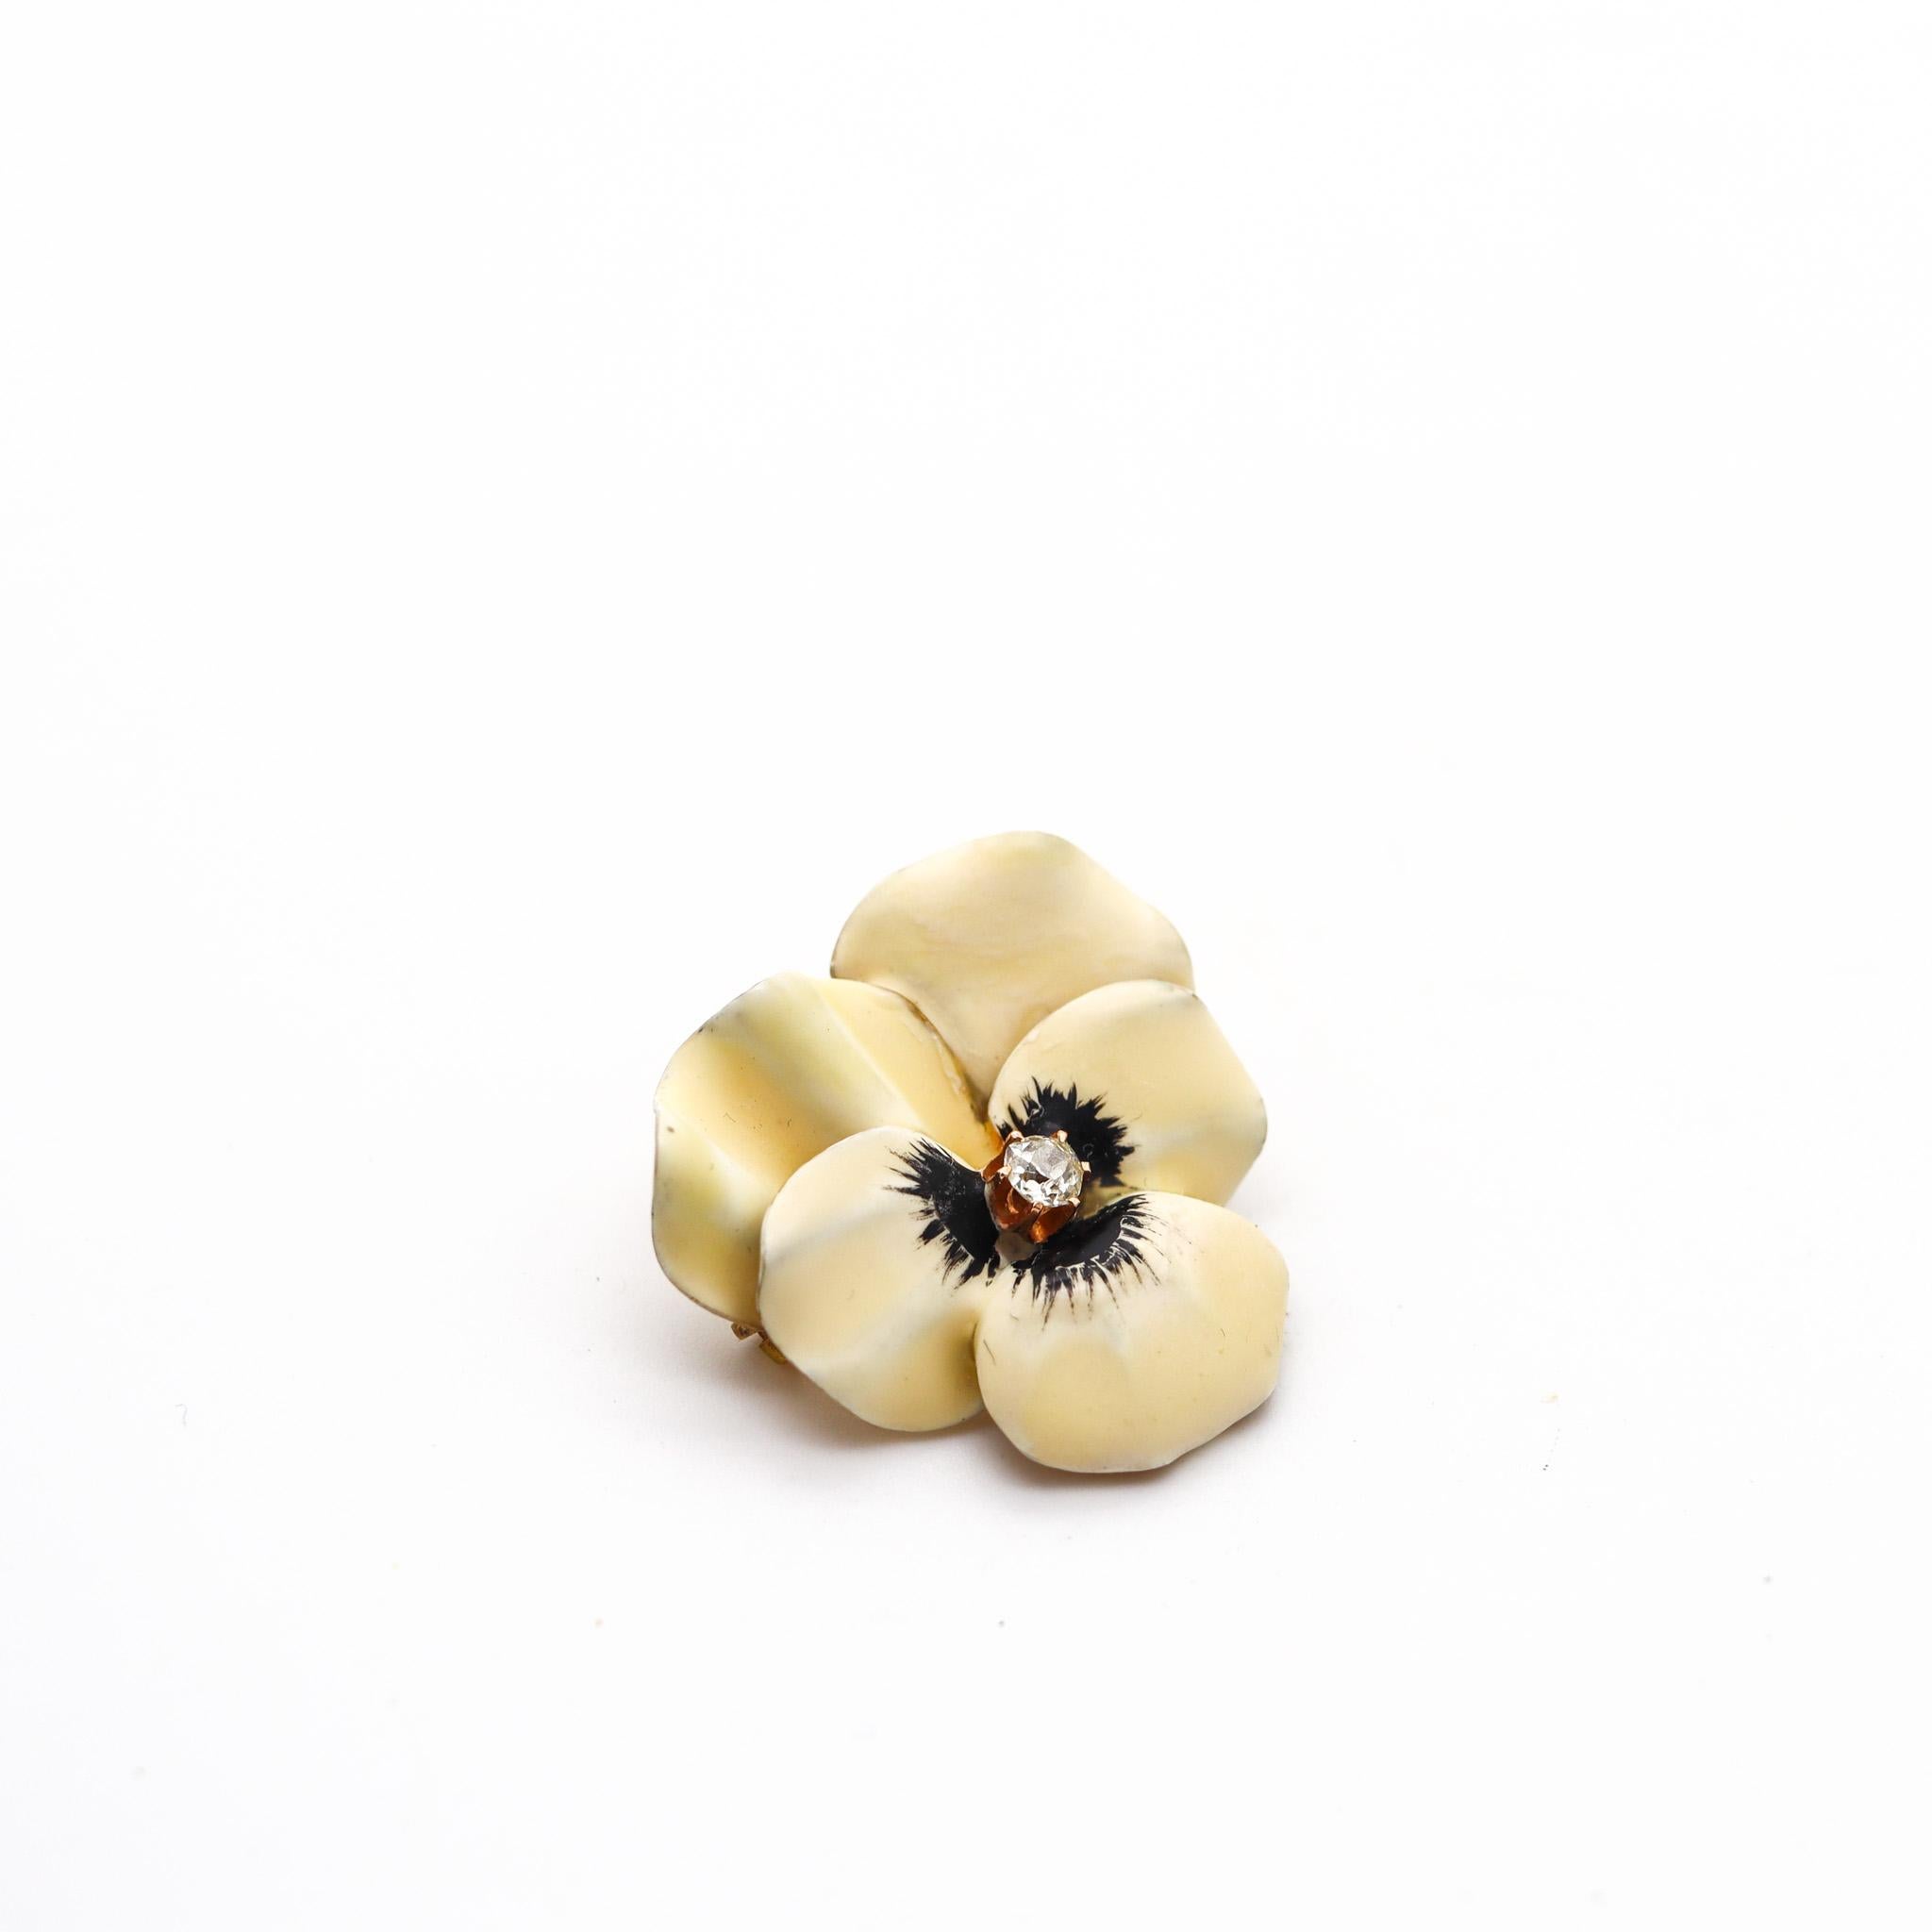 Rose Cut Edwardian 1900 Enameled White Pansy Flower Brooch In 14Kt Gold With Diamond For Sale